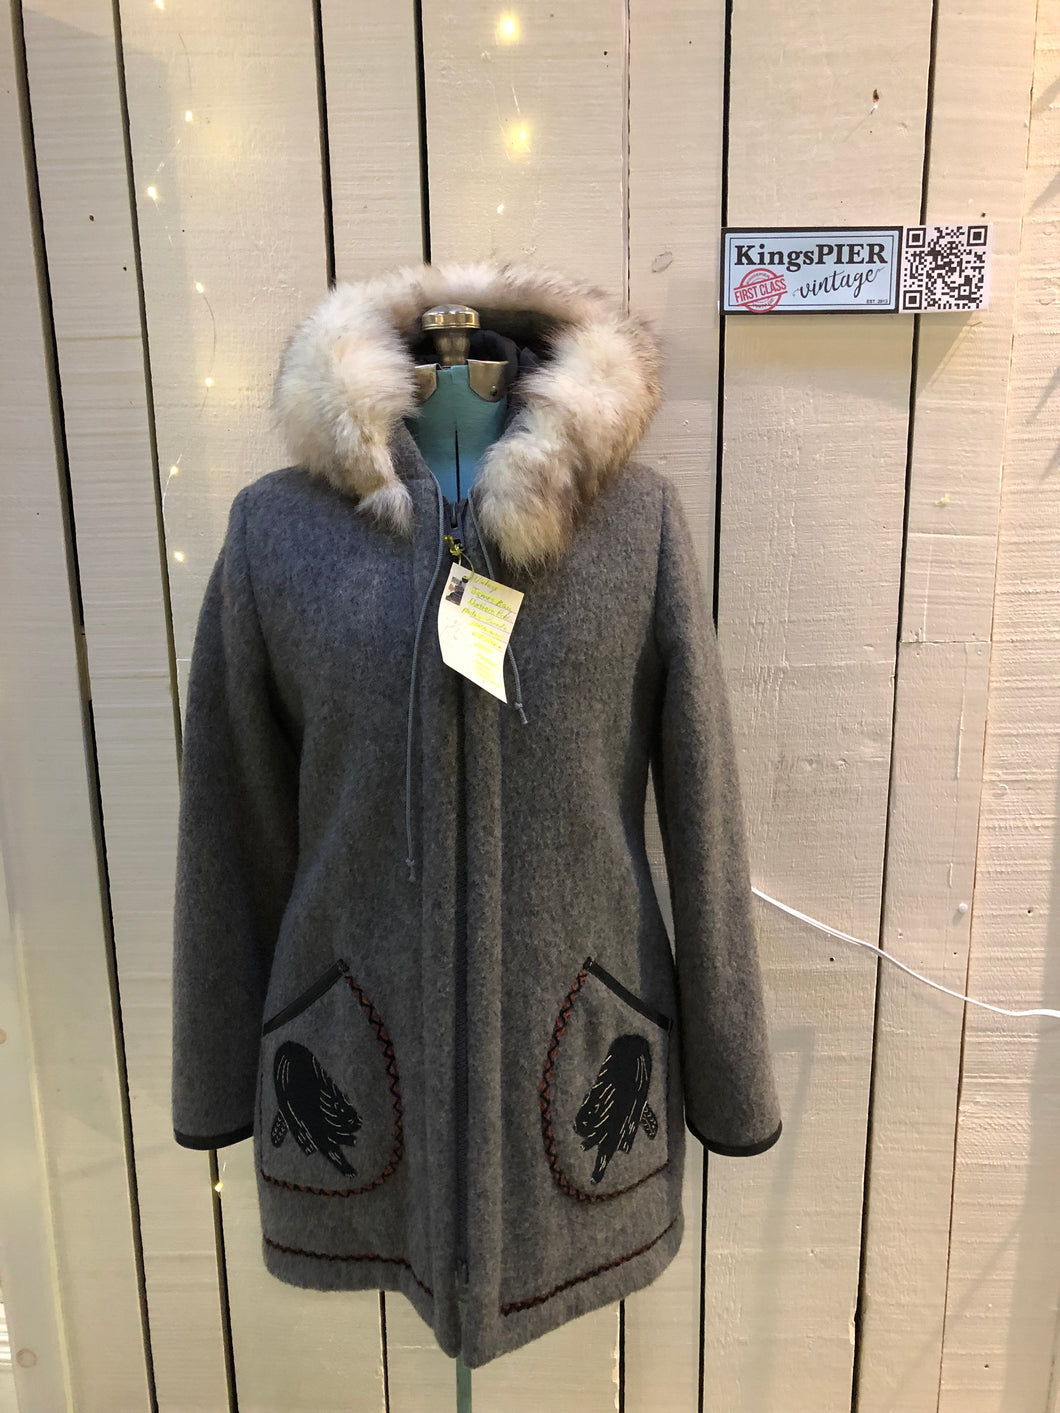 Kingspier Vintage - Vintage James Bay 100% virgin wool northern parka in grey. This parka features a fur trimmed hood, zipper closure, patch pockets, quilted lining, storm cuffs, leather trim, custom embroidery and a beaver design in felt applique. Made in Canada.Size small.